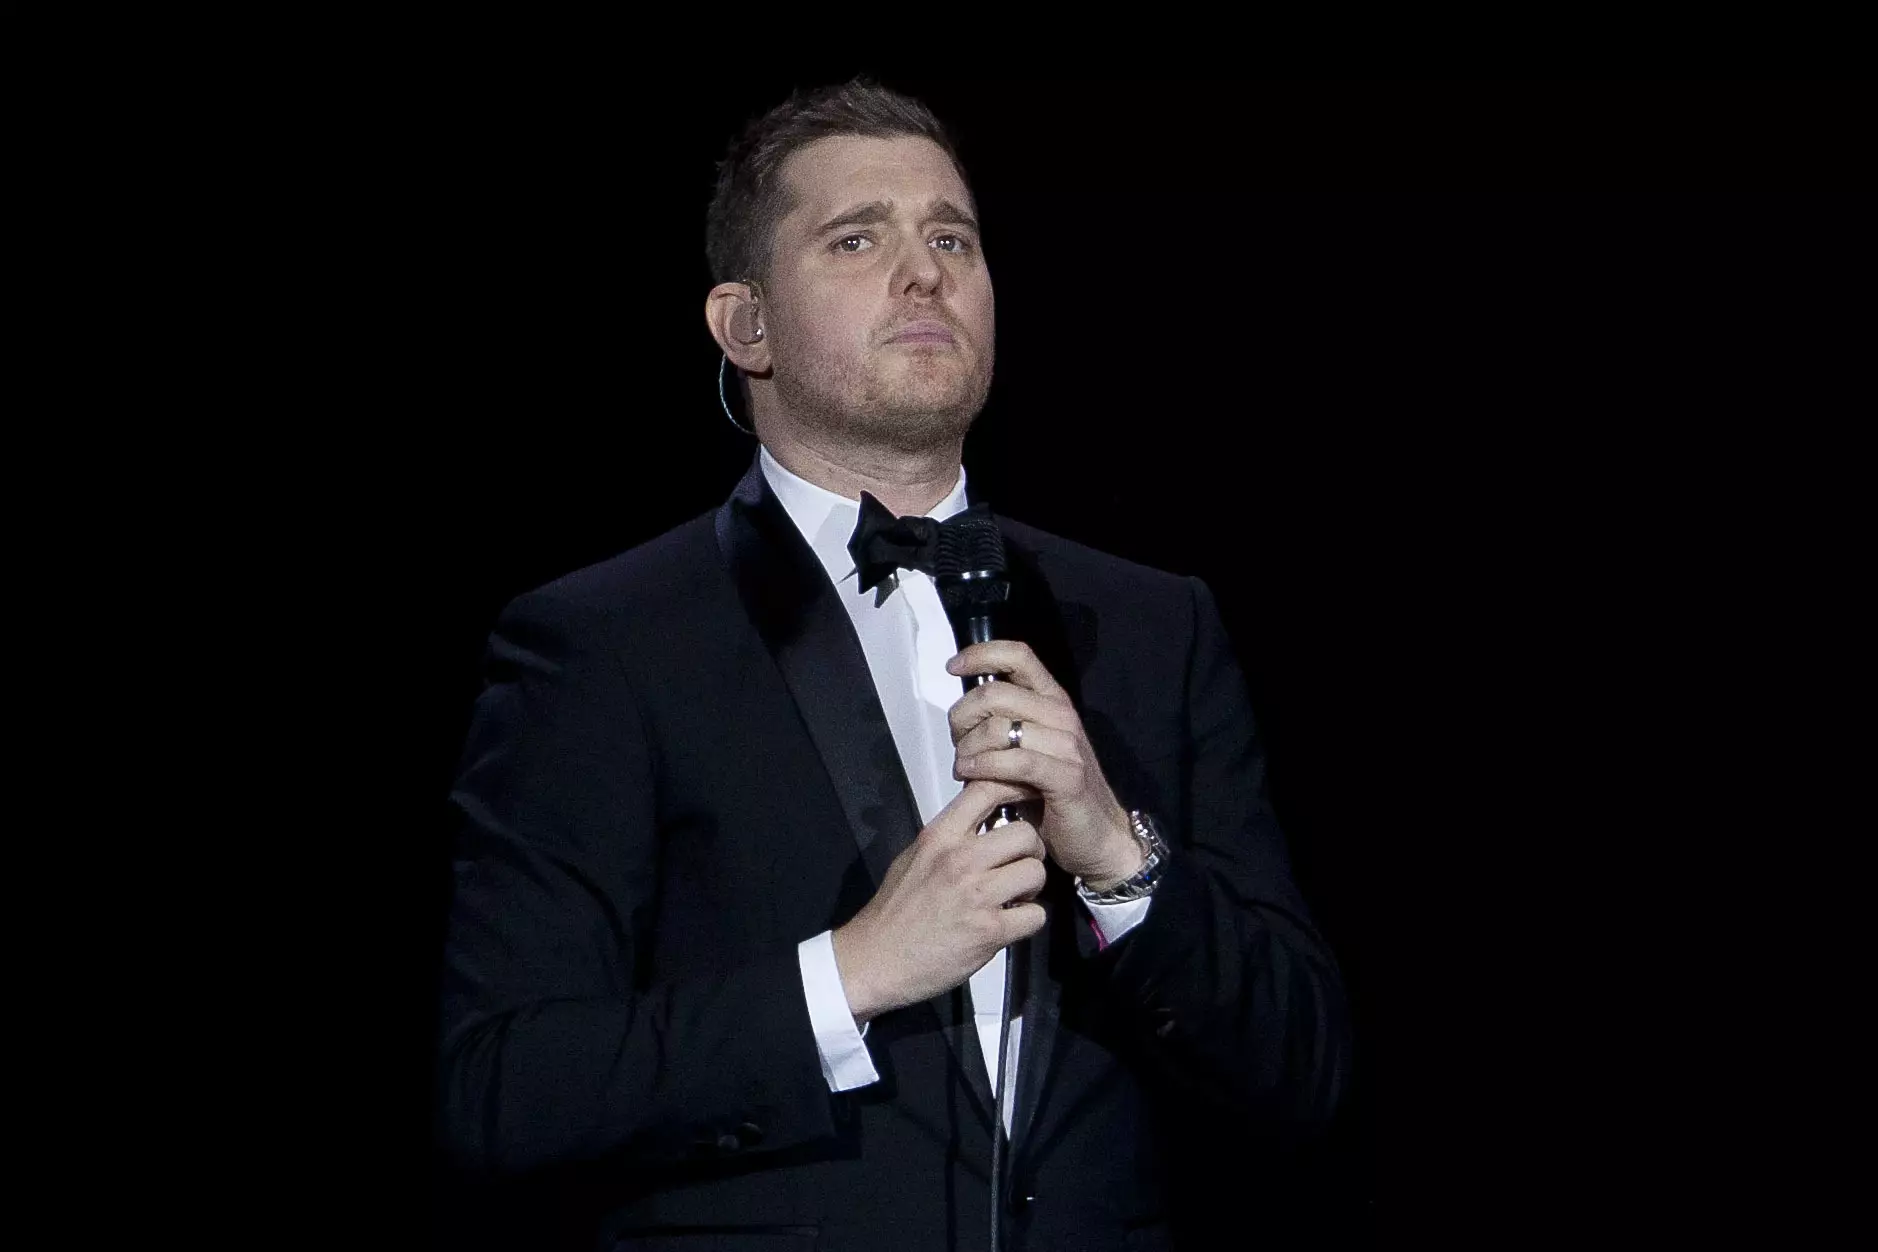 Michael Buble Drops Out Of Hosting BRIT Awards To Look After Son